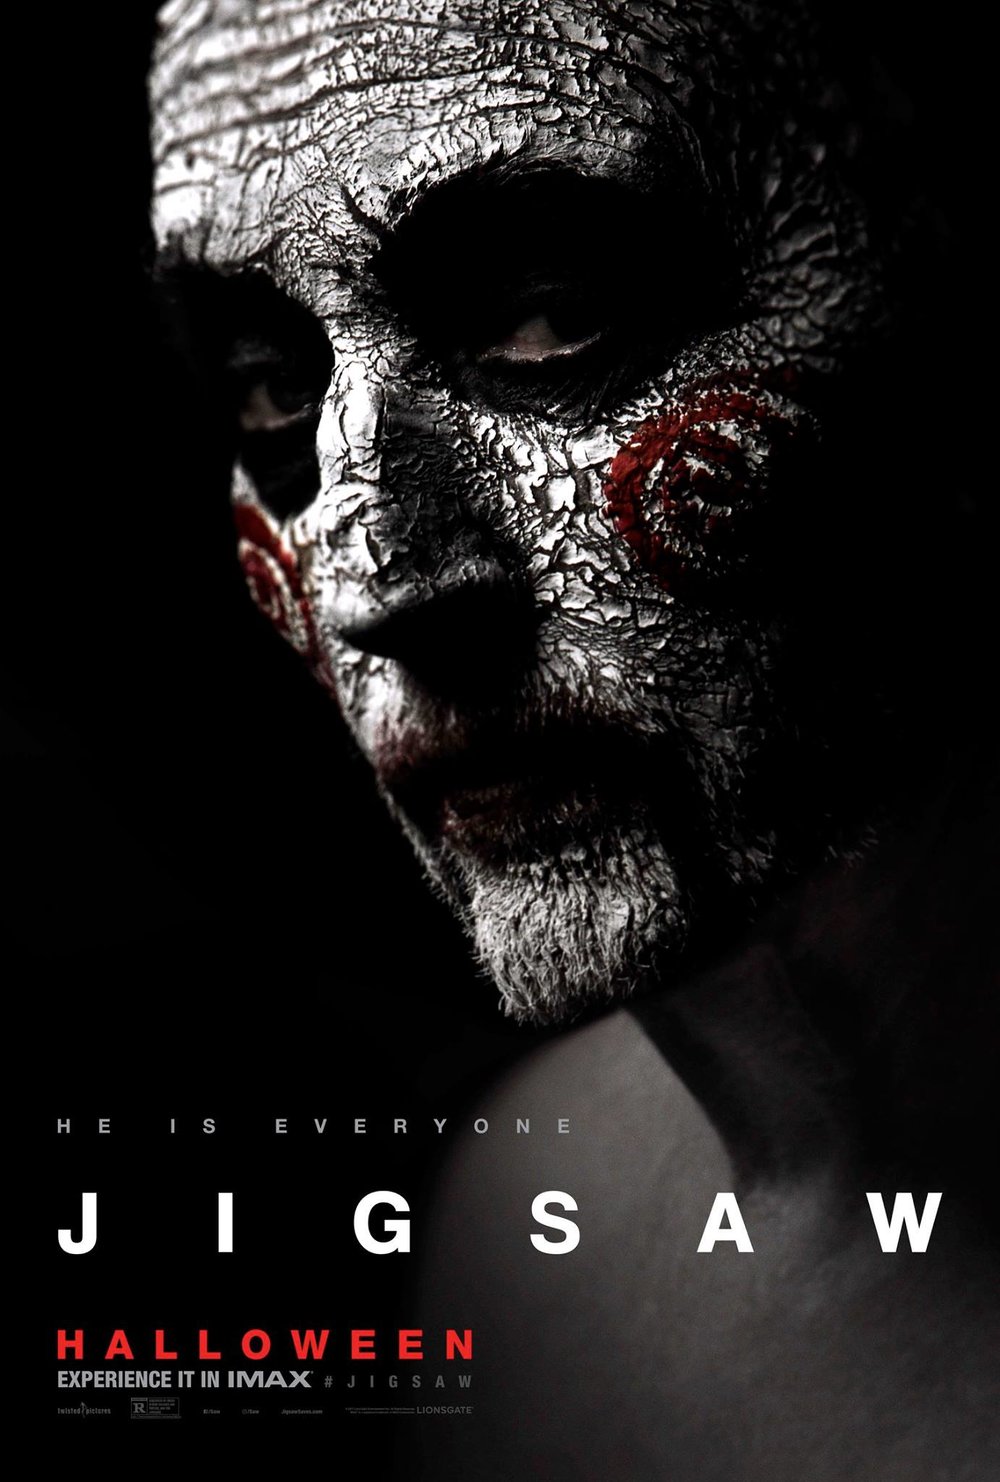 new-jigsaw-character-posters-feature-the-jigsaw-army4